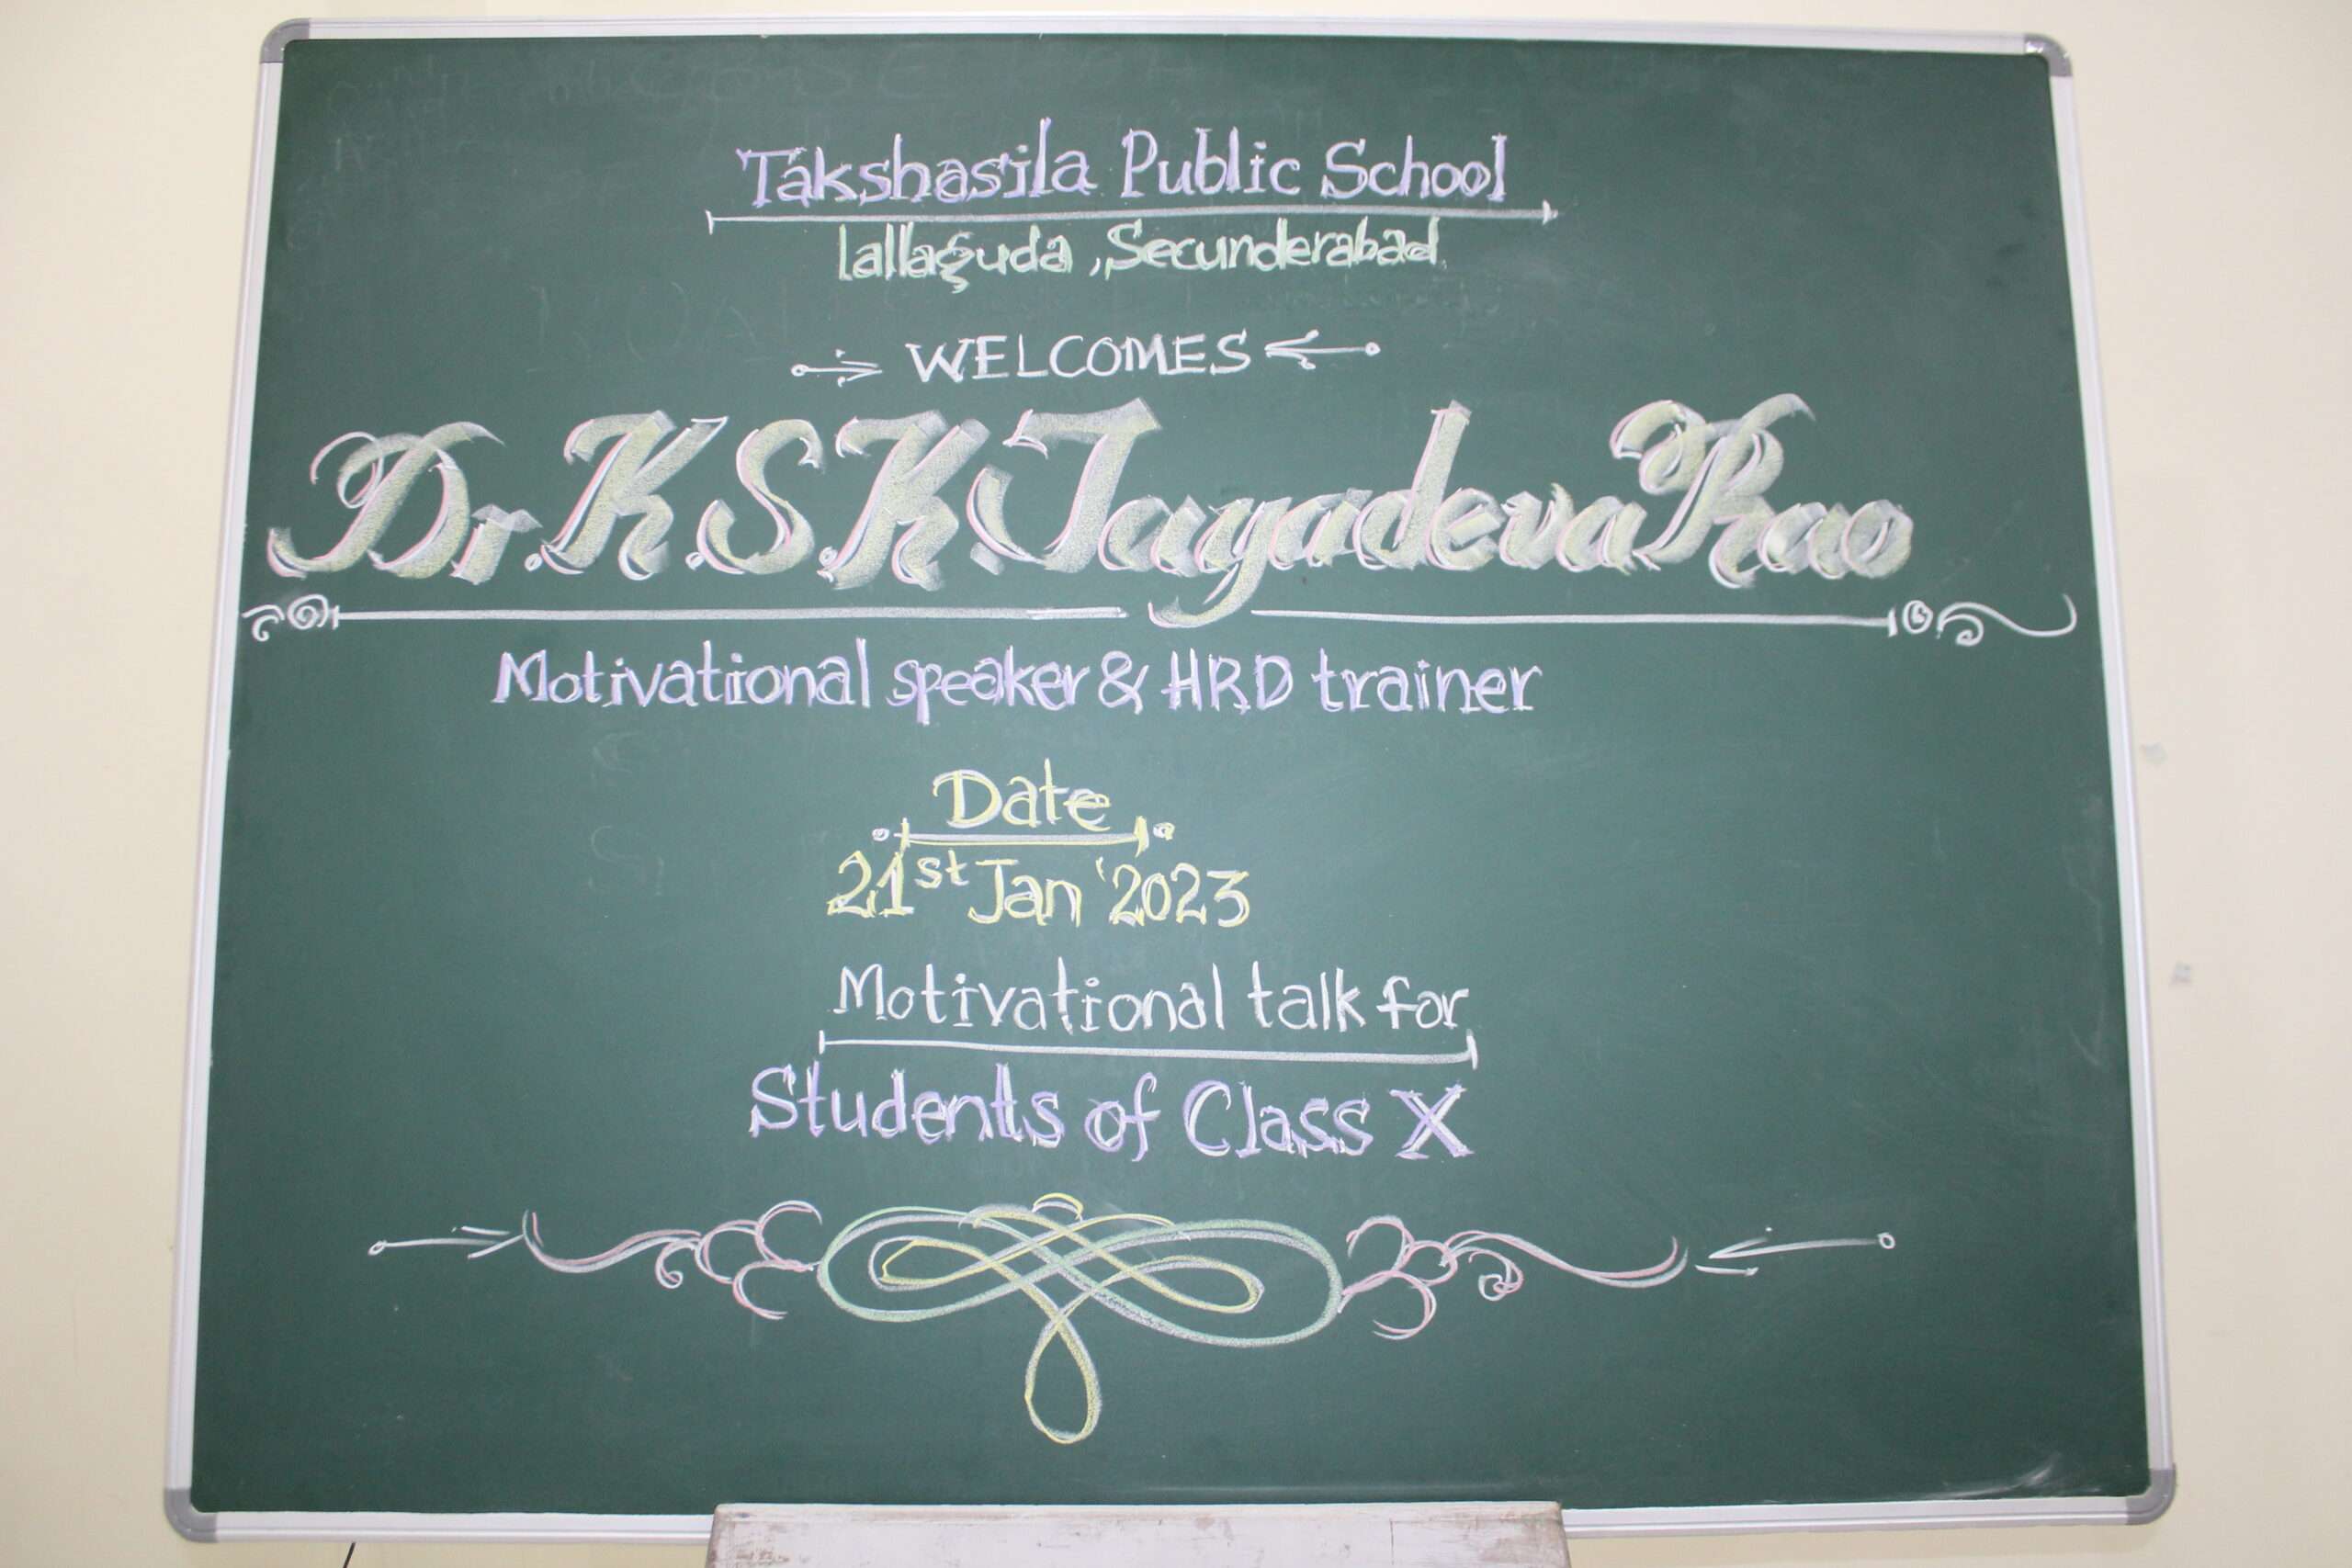 You are currently viewing Career Counselling for Class X Students by Mr. K.S.K. JAYADEVA RAO -Motivational Speaker and HRD Trainer.